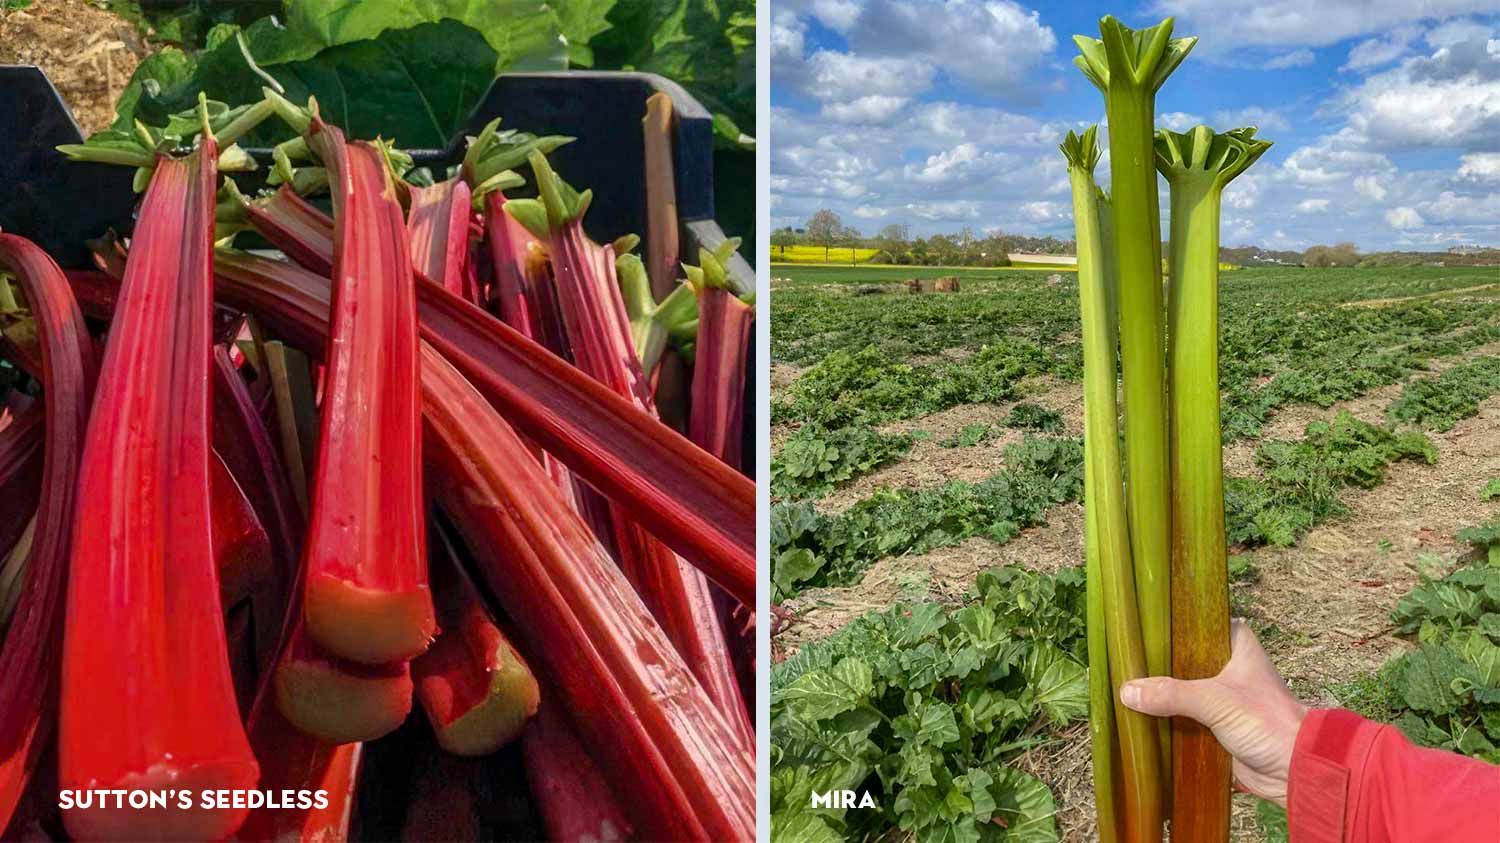 French_Rhubarb_Le_Domaine_de_la_Source_Suttons_Seedless_Mira_Rhubarb_from_France_in_Dubai_WISK_UAE.jpg